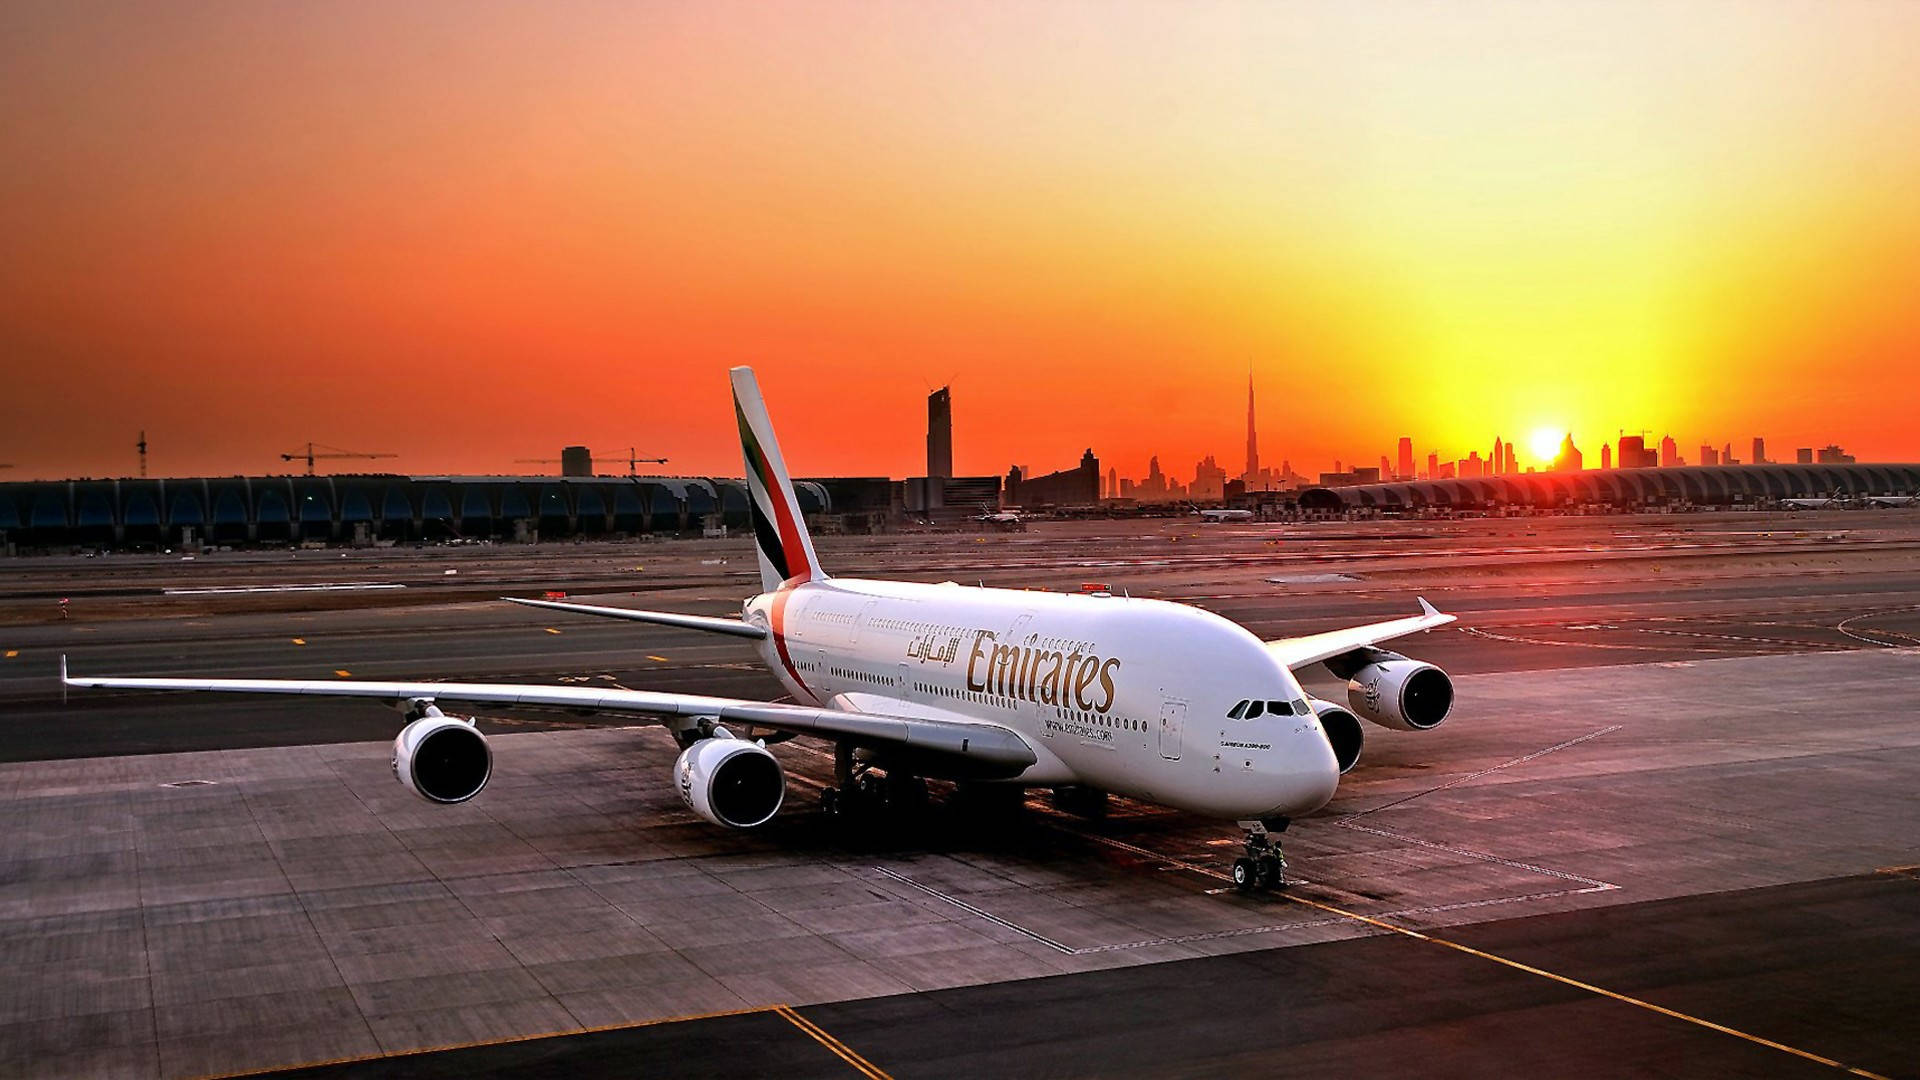 Download Emirates Airplane At The Airport Wallpaper 